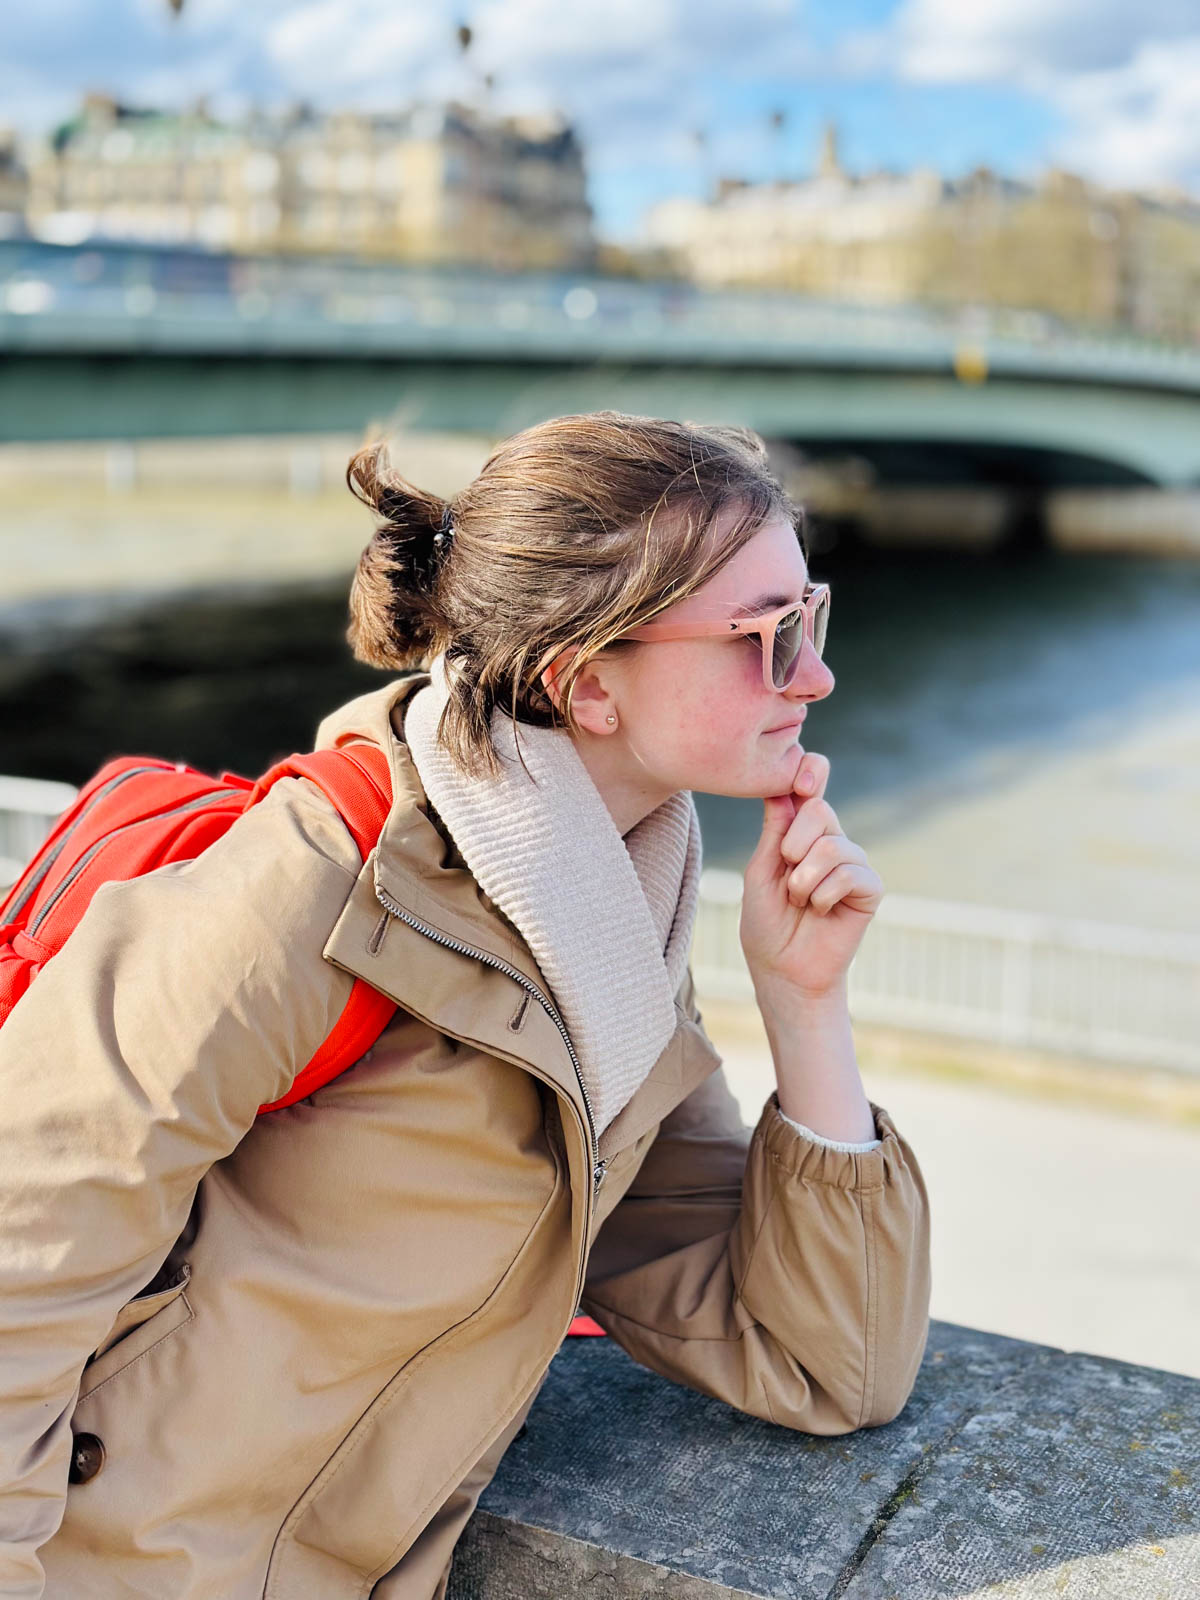 A young girl poses in front of the river in Paris.